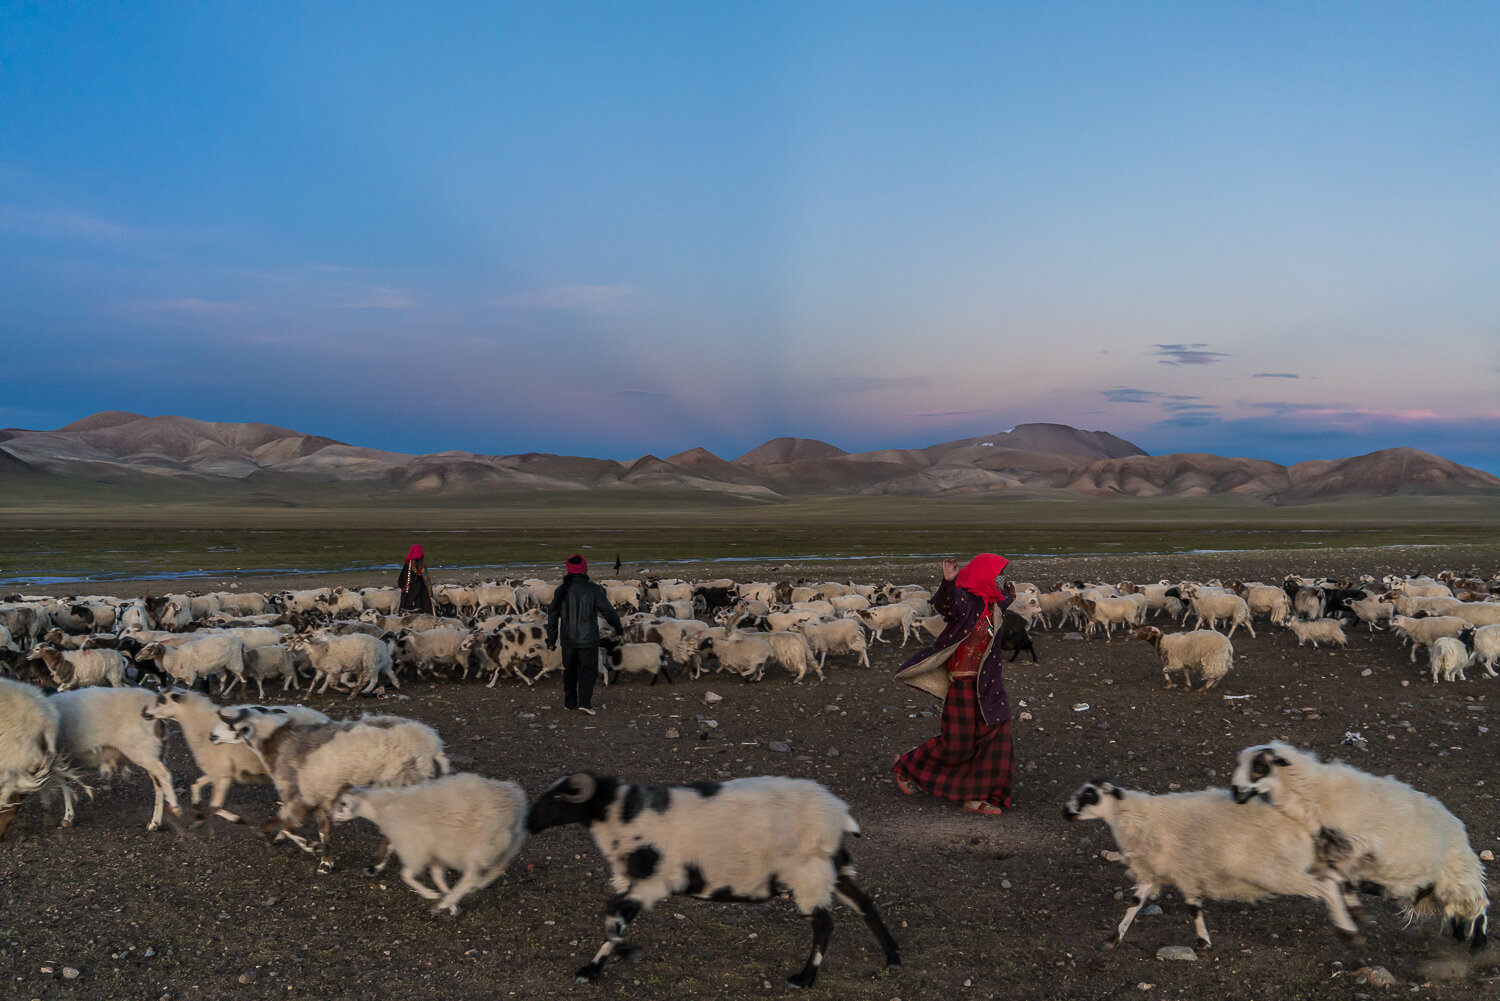  Gudong, 19, Thupthen, 39, and Choezang, 38, from left, herd their sheep and goats together for the night near her nomad camp along the Indus River, summer pastures which residents refer to as Yakra Changma, on Friday, September 6, 2019 in Gê'gyai Co